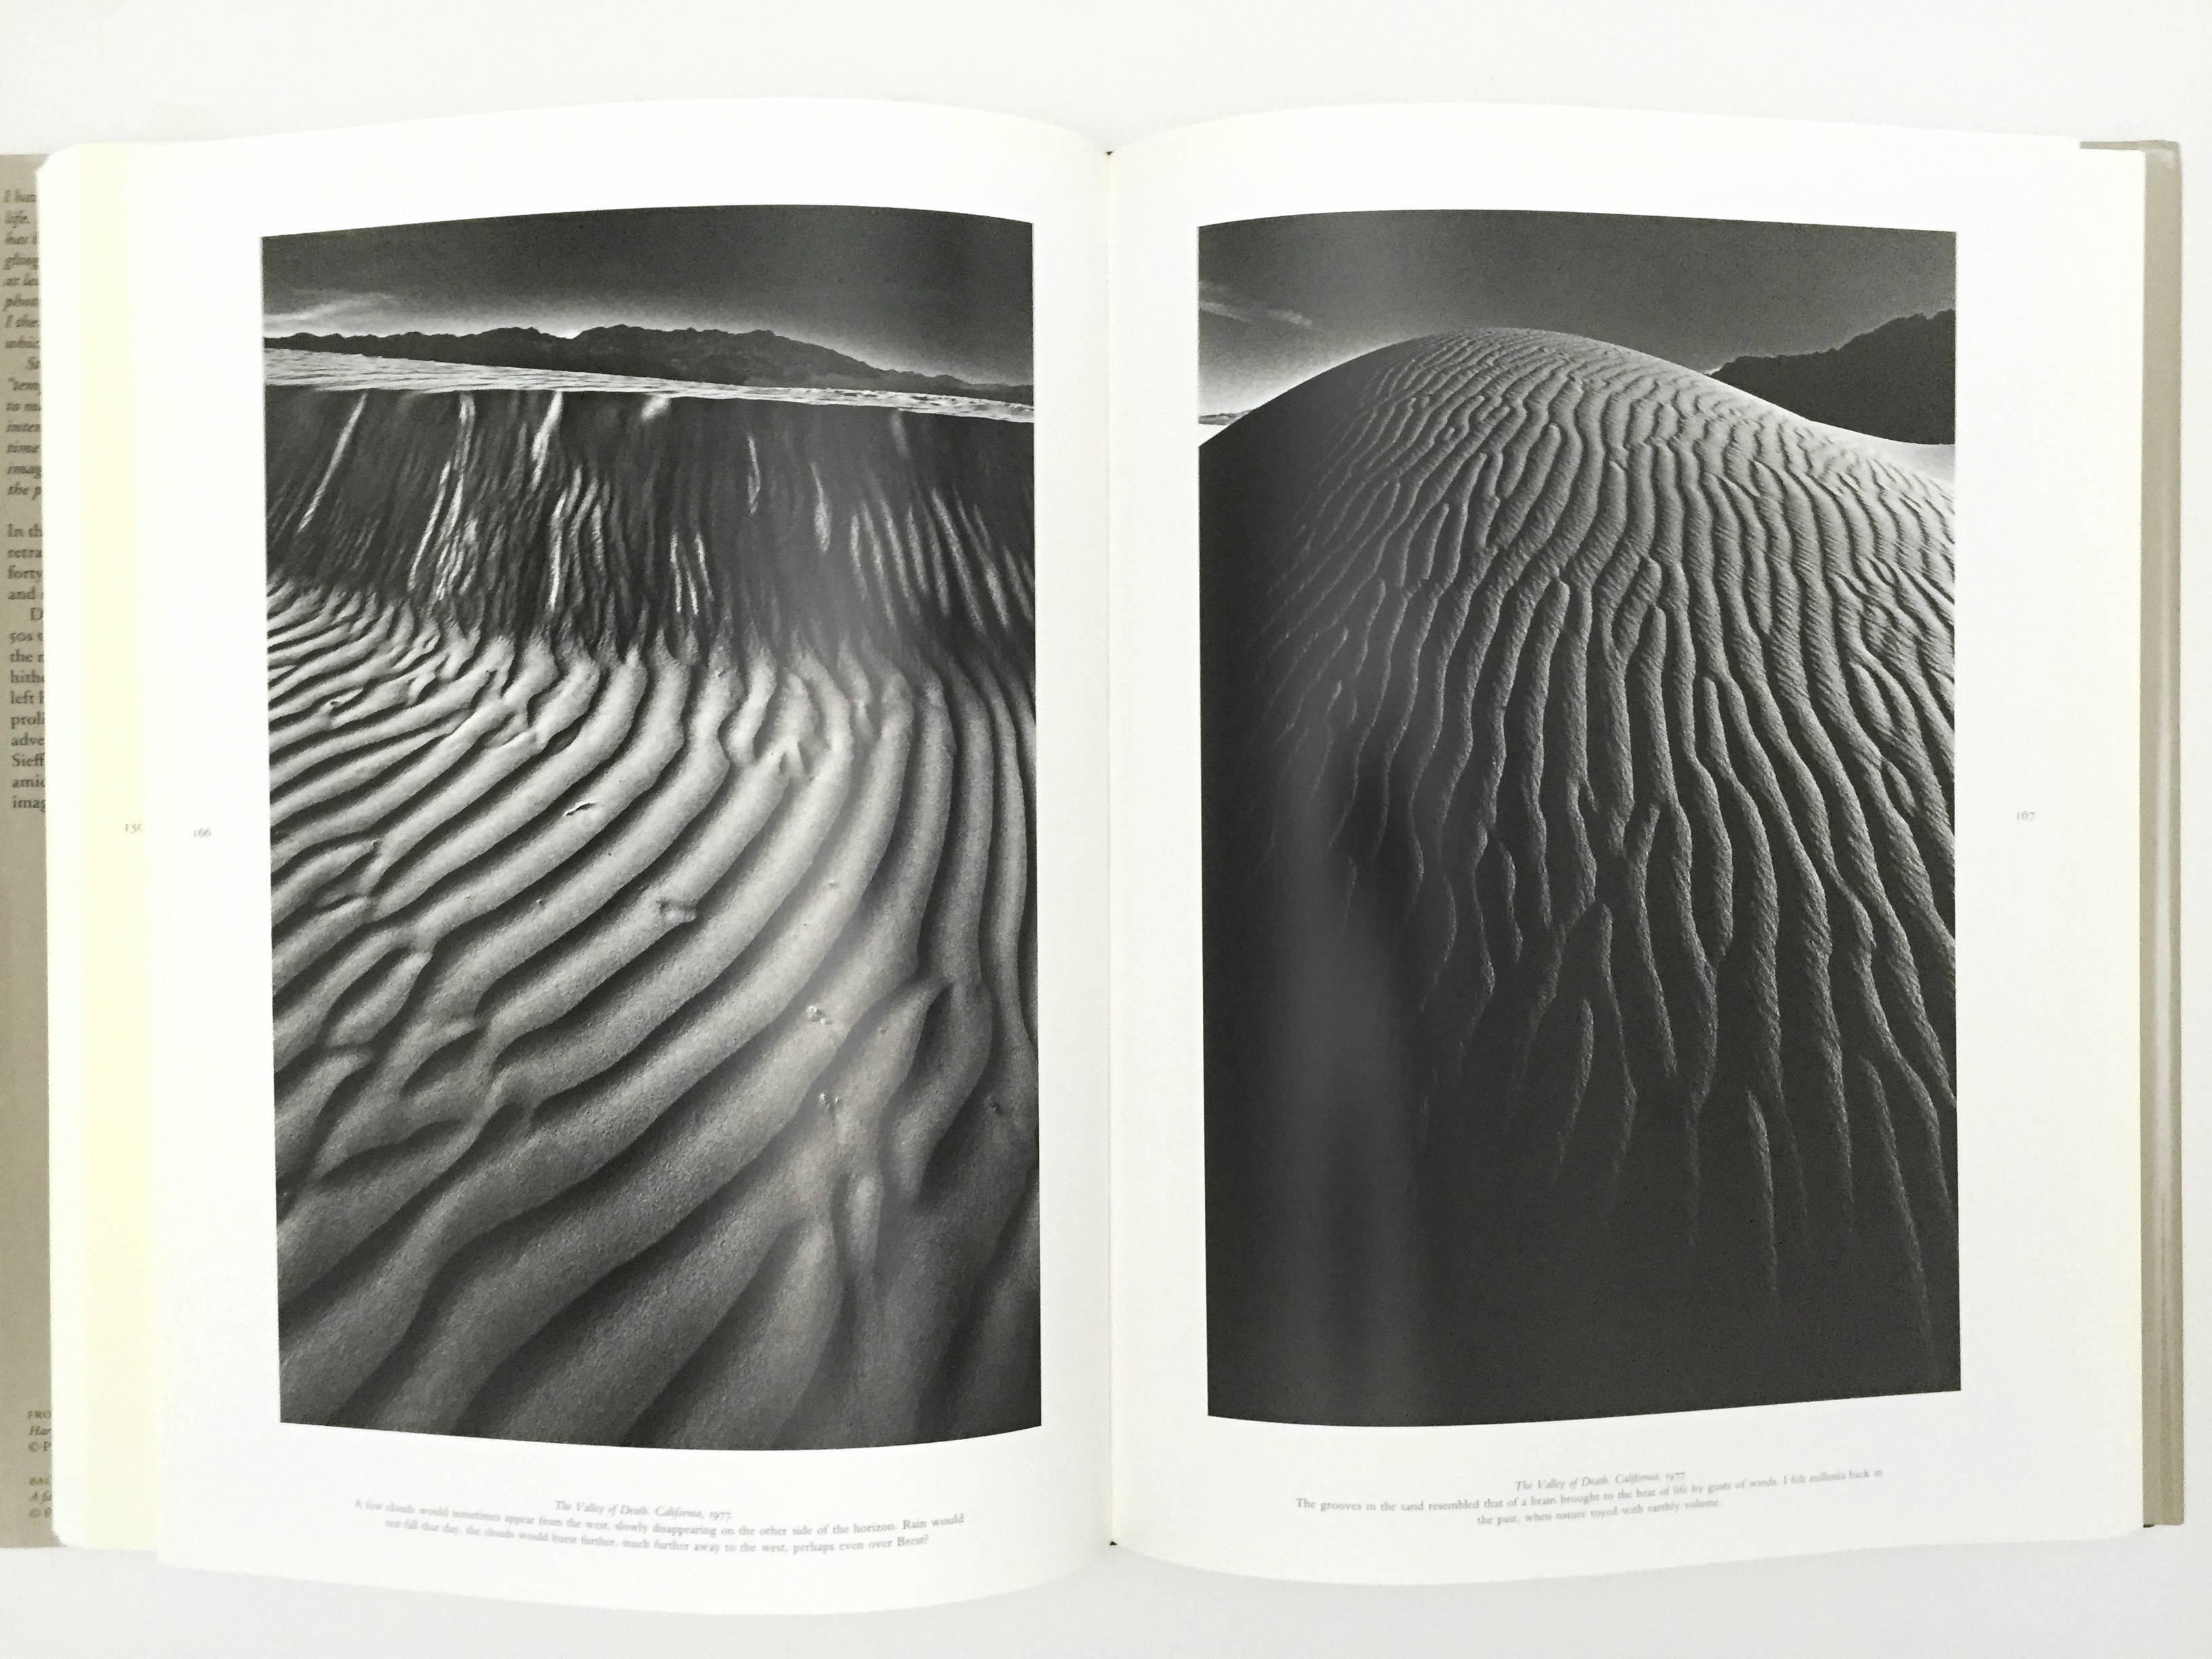 Paper Jeanloup Sieff: 40 Years of Photography - 1st Edition, Evergreen/Taschen, 1996